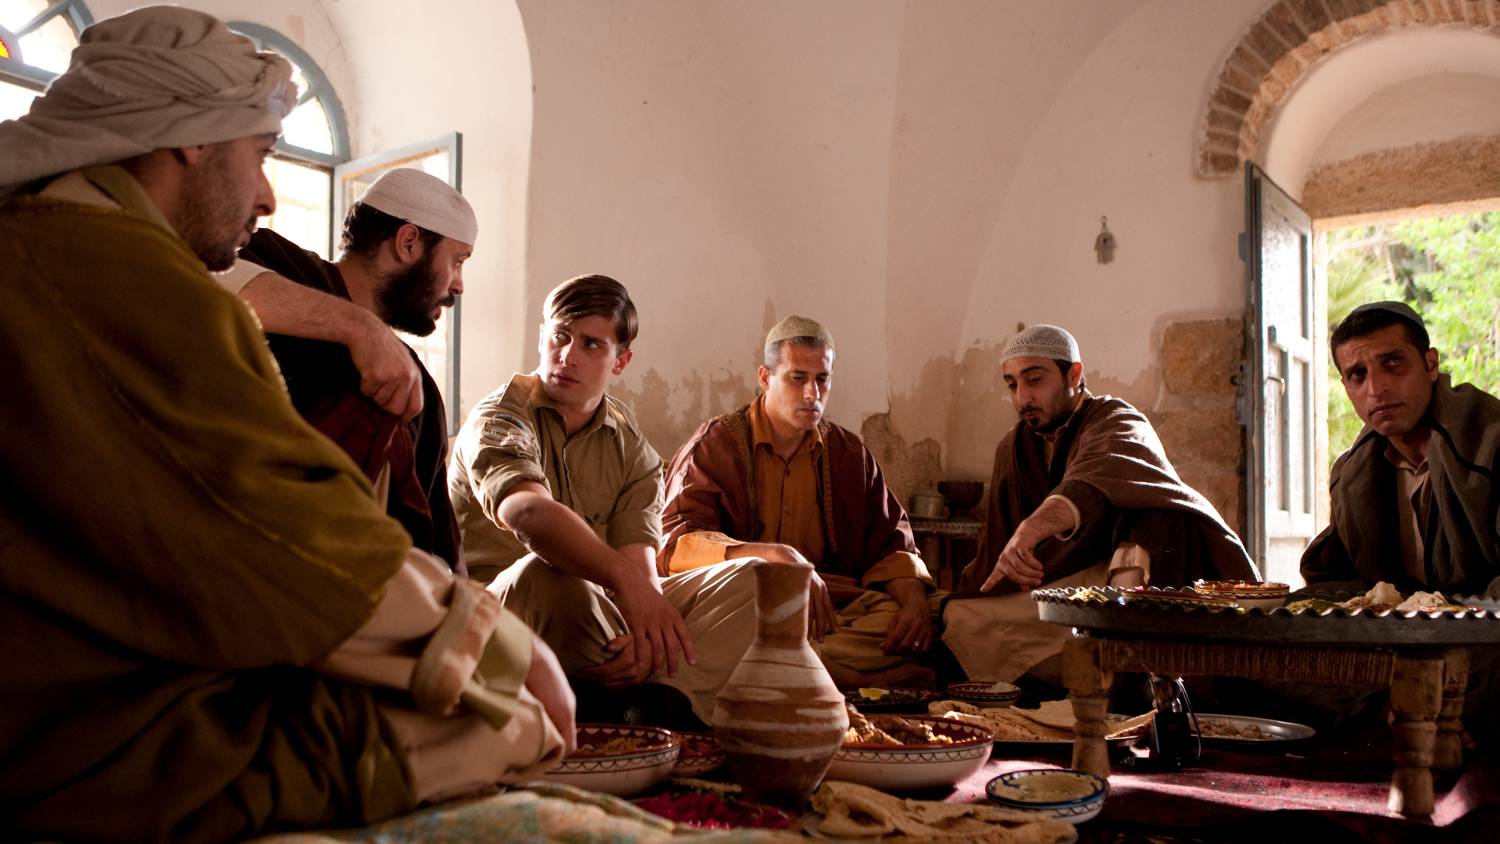 Mohammed, played by Ali Suliman, played a role that depicted aspects of his own life (Channel 4)